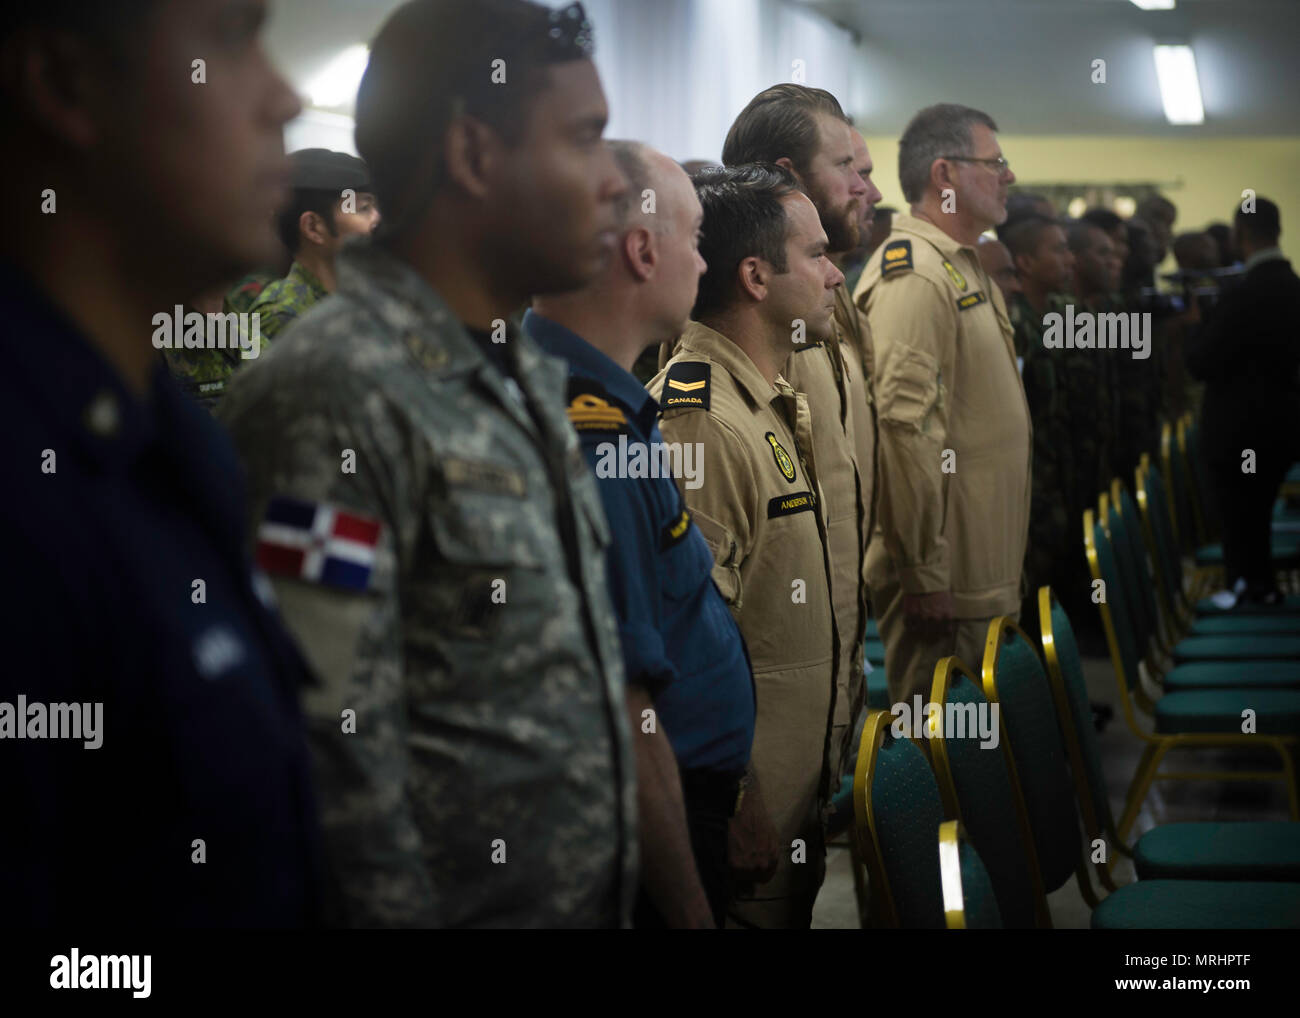 PORT OF SPAIN, Trinidad - Canadian Armed Forces members stand at attention as the Trinidad and Tobago Chief of Defence Staff arrive during Exercise TRADEWINDS 17 closing ceremony in Chaguaramas, Trinidad and Tobago on June 17, 2017. (Canadian Forces Joint Imagery Centre photo by Avr Desiree T. Bourdon) Stock Photo